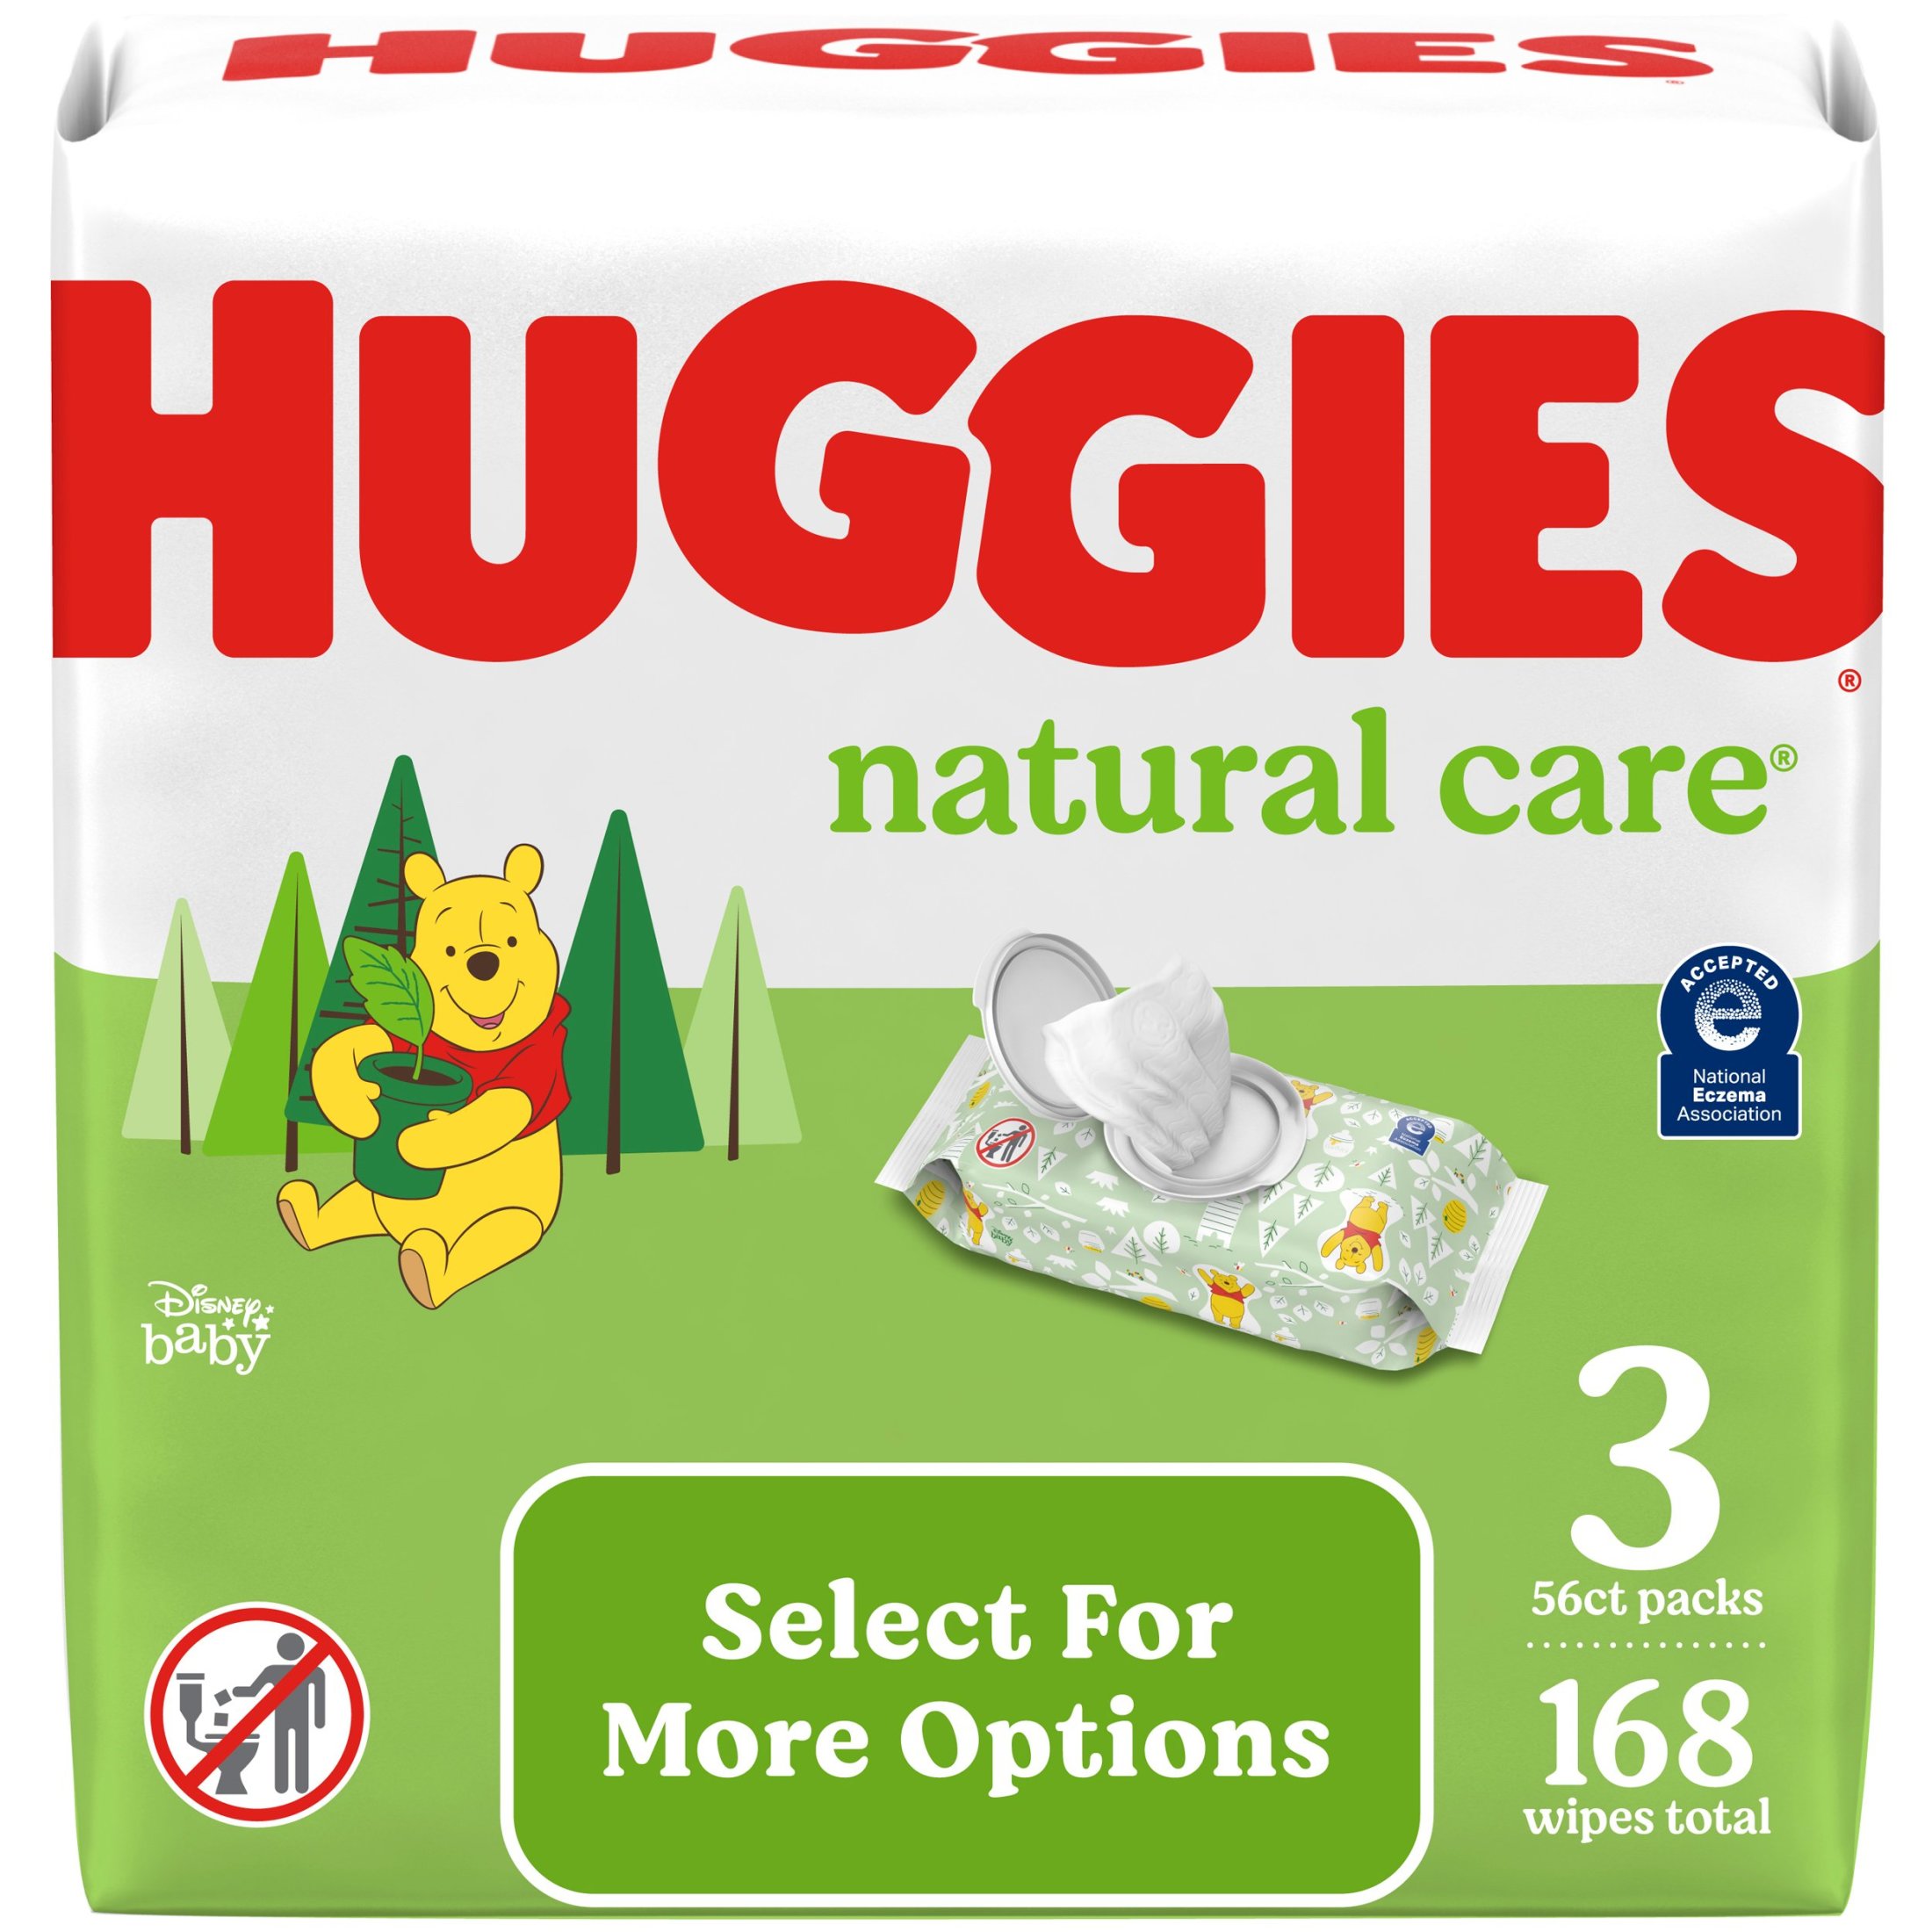 Huggies Natural Care Sensitive Baby Wipes, Unscented, 3 Pack, 168 Total Ct (Select for More Options) - image 1 of 13